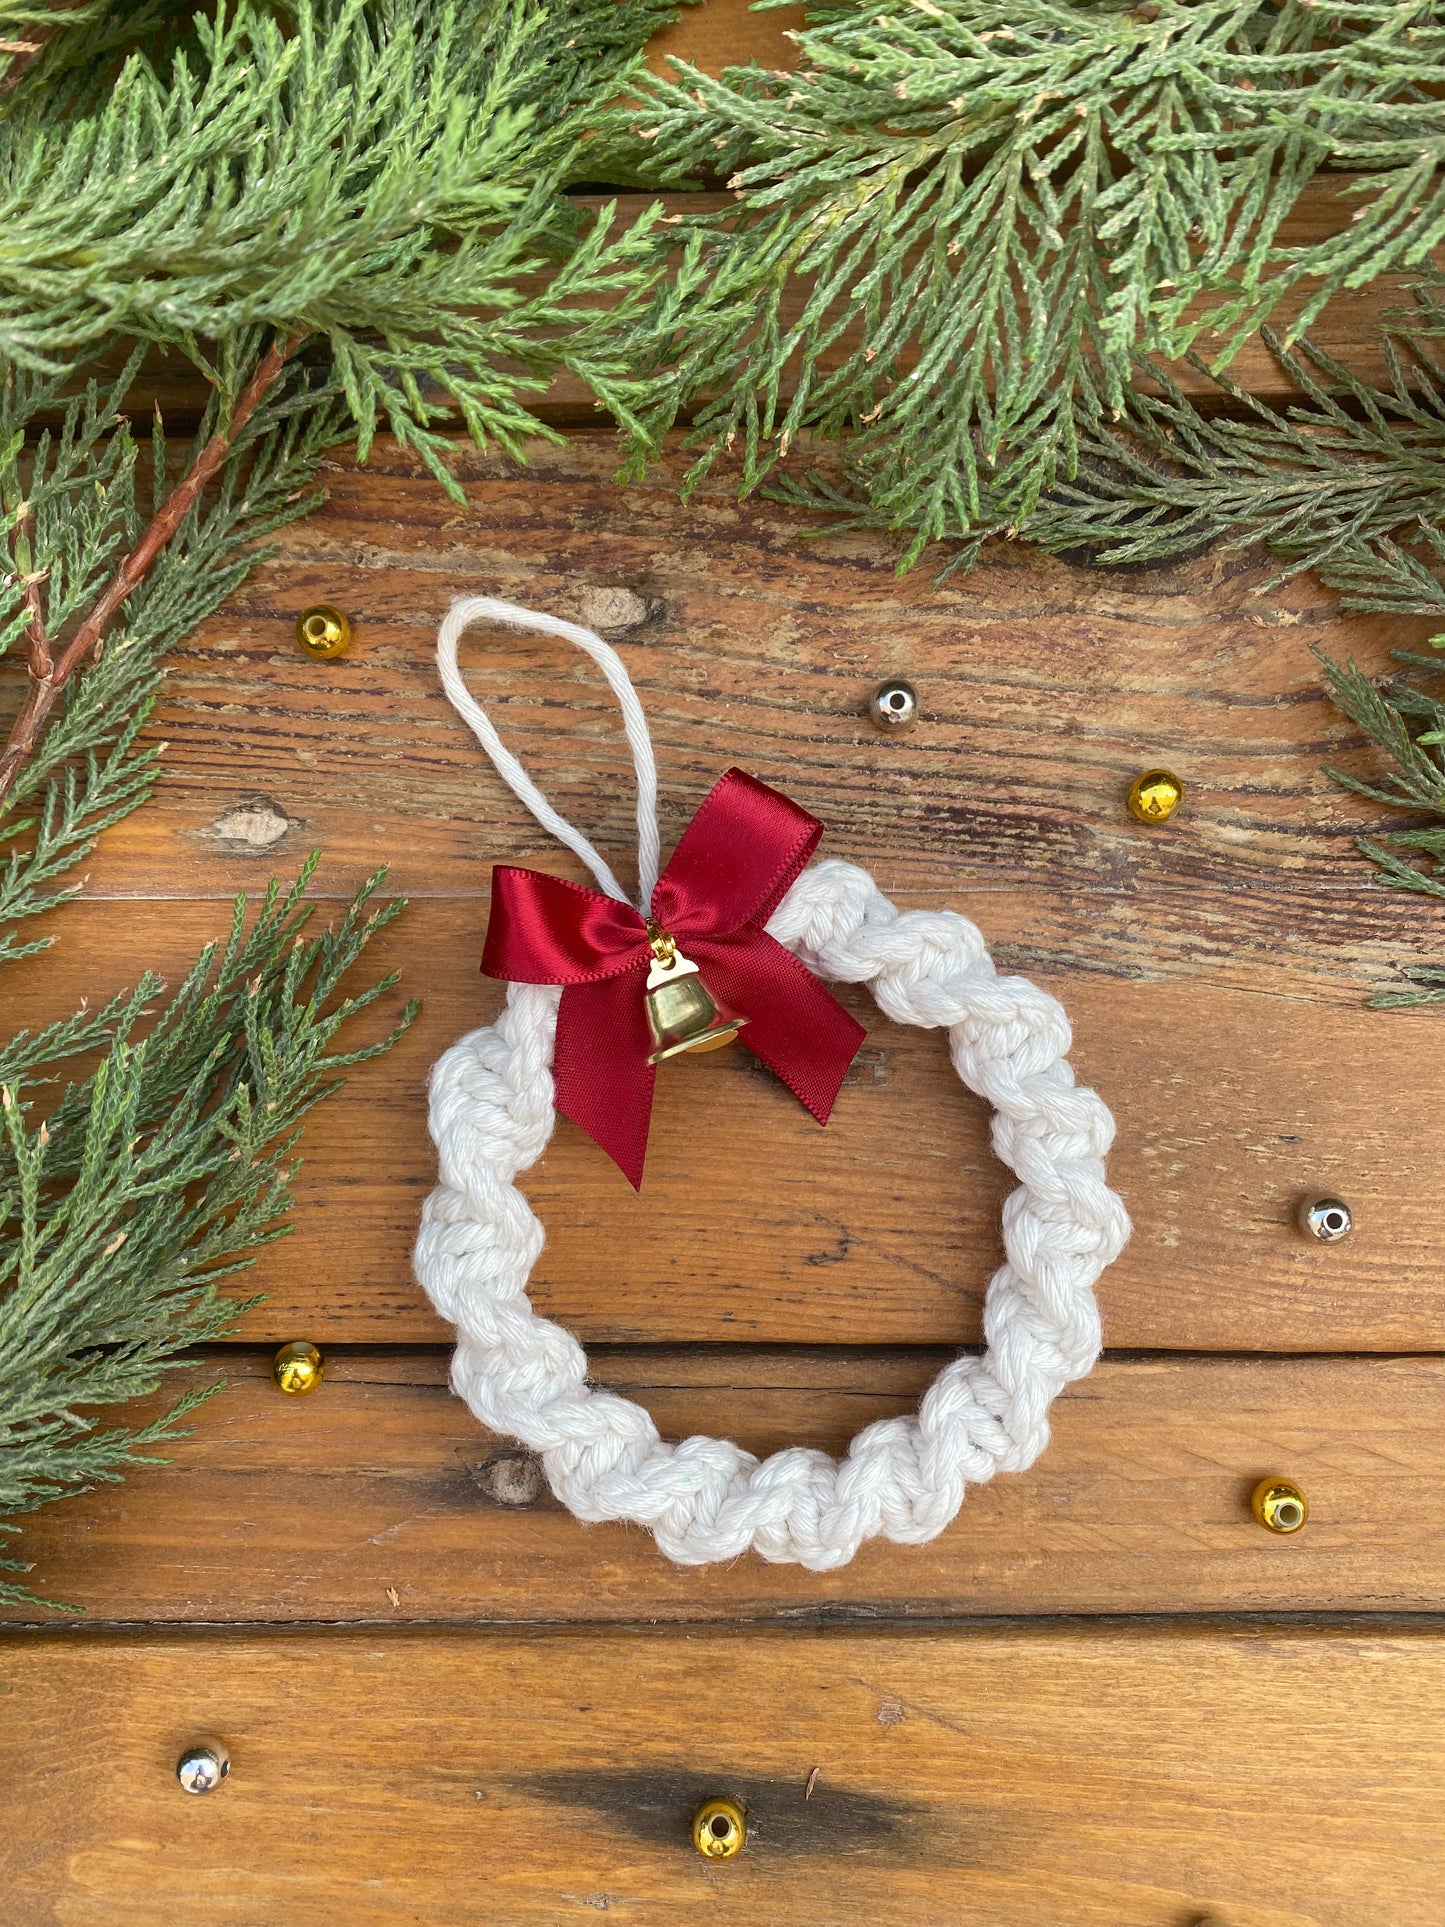 Christmas Wreath with Bell